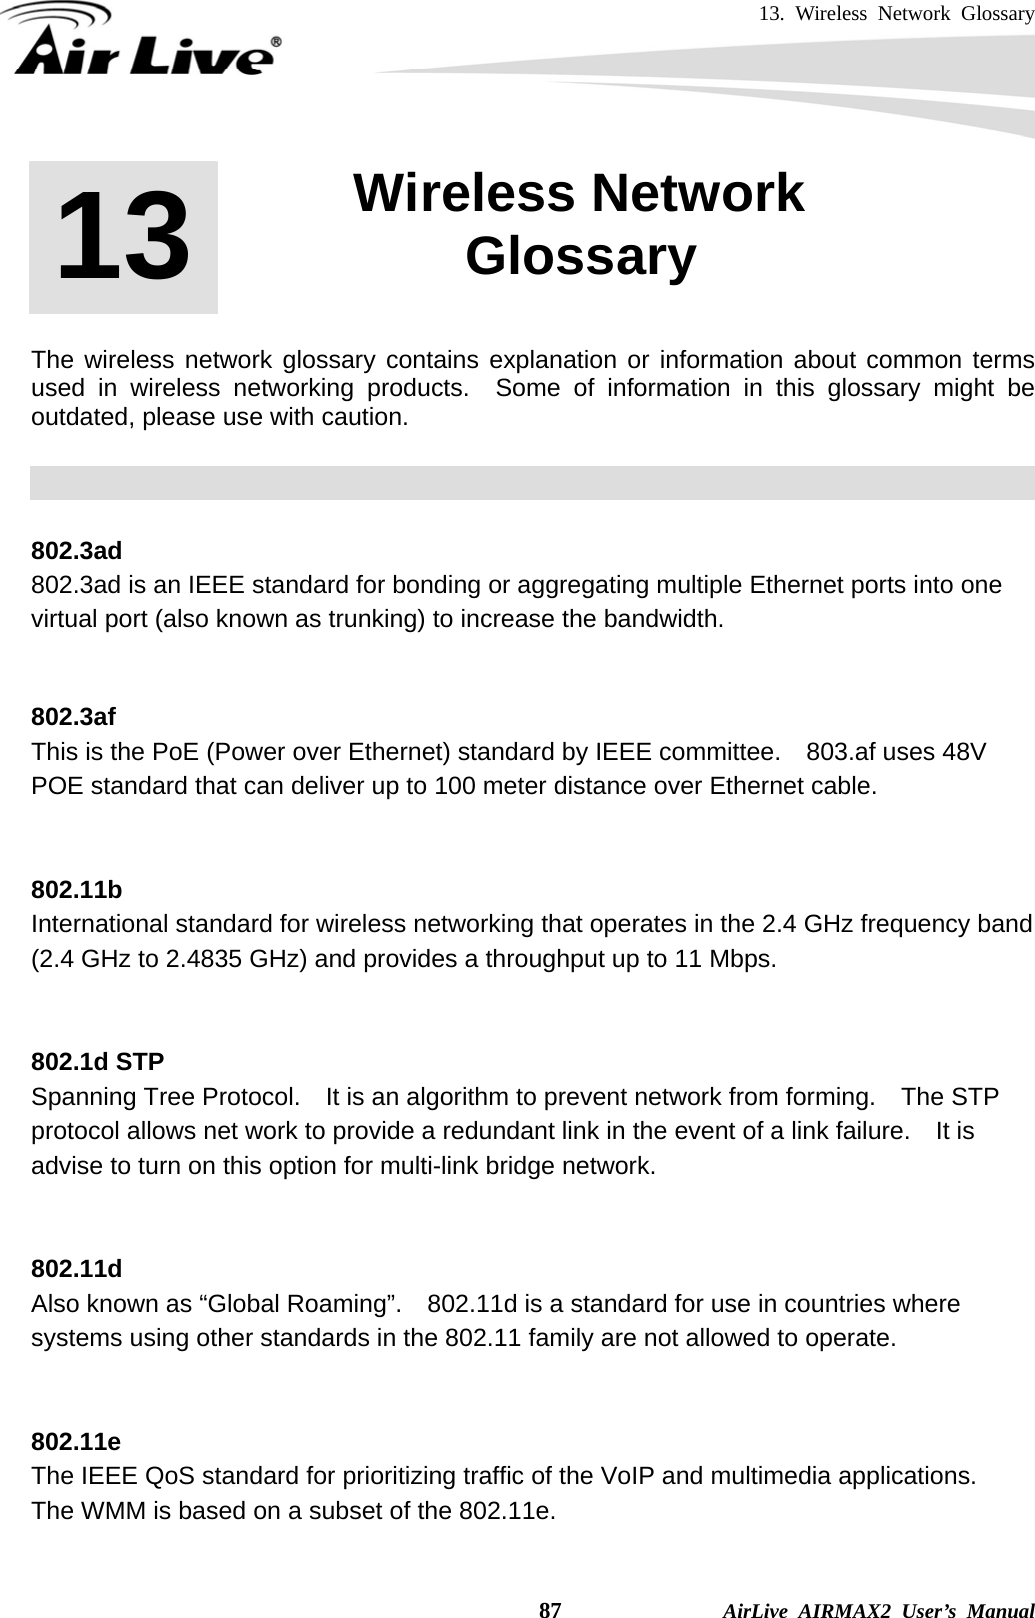 13. Wireless Network Glossary    87              AirLive AIRMAX2 User’s Manual       The wireless network glossary contains explanation or information about common terms used in wireless networking products.  Some of information in this glossary might be outdated, please use with caution.    802.3ad 802.3ad is an IEEE standard for bonding or aggregating multiple Ethernet ports into one virtual port (also known as trunking) to increase the bandwidth.   802.3af This is the PoE (Power over Ethernet) standard by IEEE committee.  803.af uses 48V POE standard that can deliver up to 100 meter distance over Ethernet cable.   802.11b International standard for wireless networking that operates in the 2.4 GHz frequency band (2.4 GHz to 2.4835 GHz) and provides a throughput up to 11 Mbps.     802.1d STP Spanning Tree Protocol.    It is an algorithm to prevent network from forming.    The STP protocol allows net work to provide a redundant link in the event of a link failure.    It is advise to turn on this option for multi-link bridge network.   802.11d Also known as “Global Roaming”.    802.11d is a standard for use in countries where systems using other standards in the 802.11 family are not allowed to operate.   802.11e The IEEE QoS standard for prioritizing traffic of the VoIP and multimedia applications.   The WMM is based on a subset of the 802.11e.  13  13. Wireless Network Glossary  